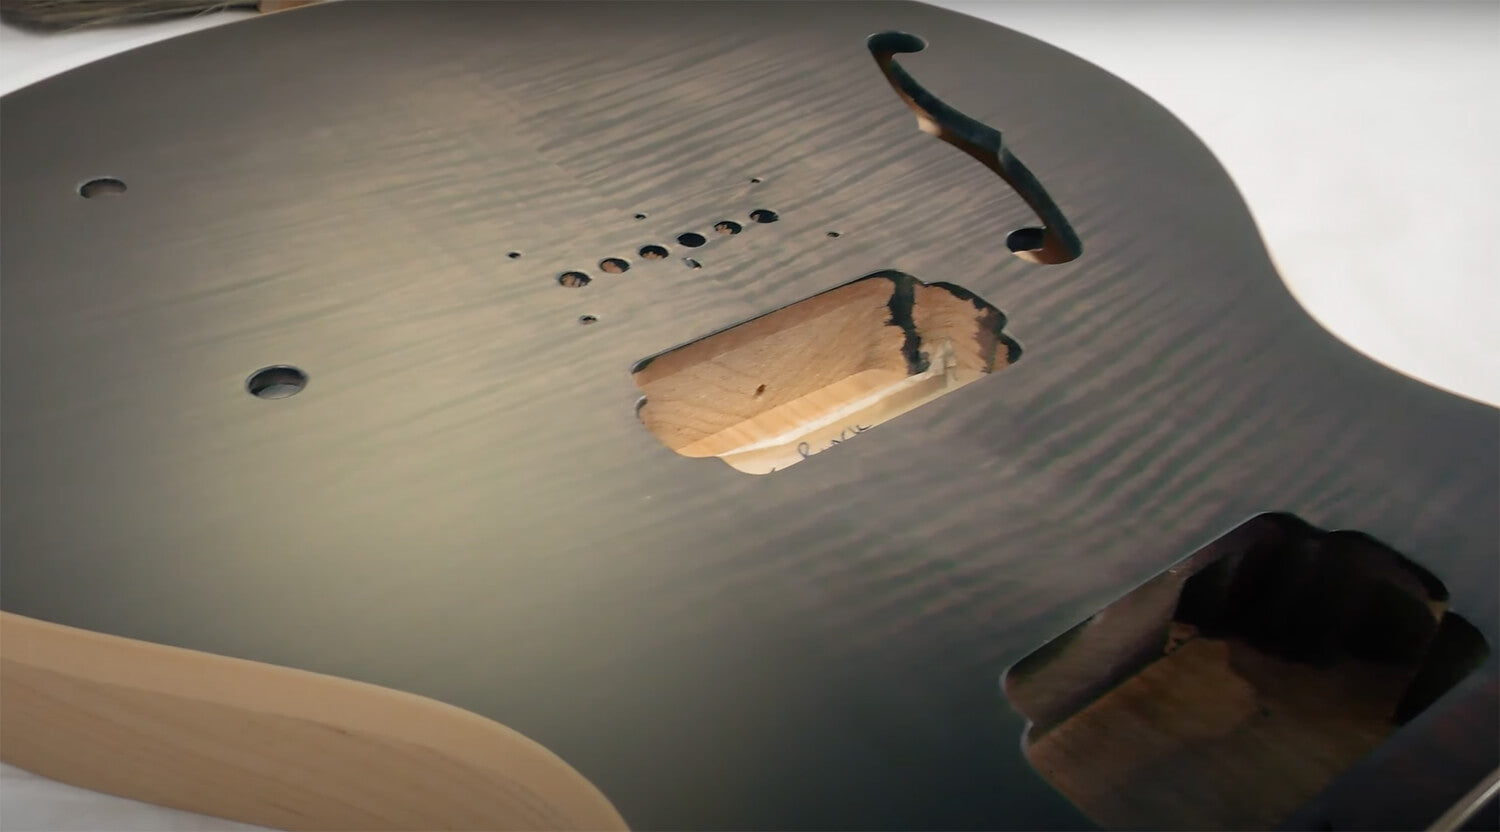 Load video: A video tour inside the PJD guitars factory.